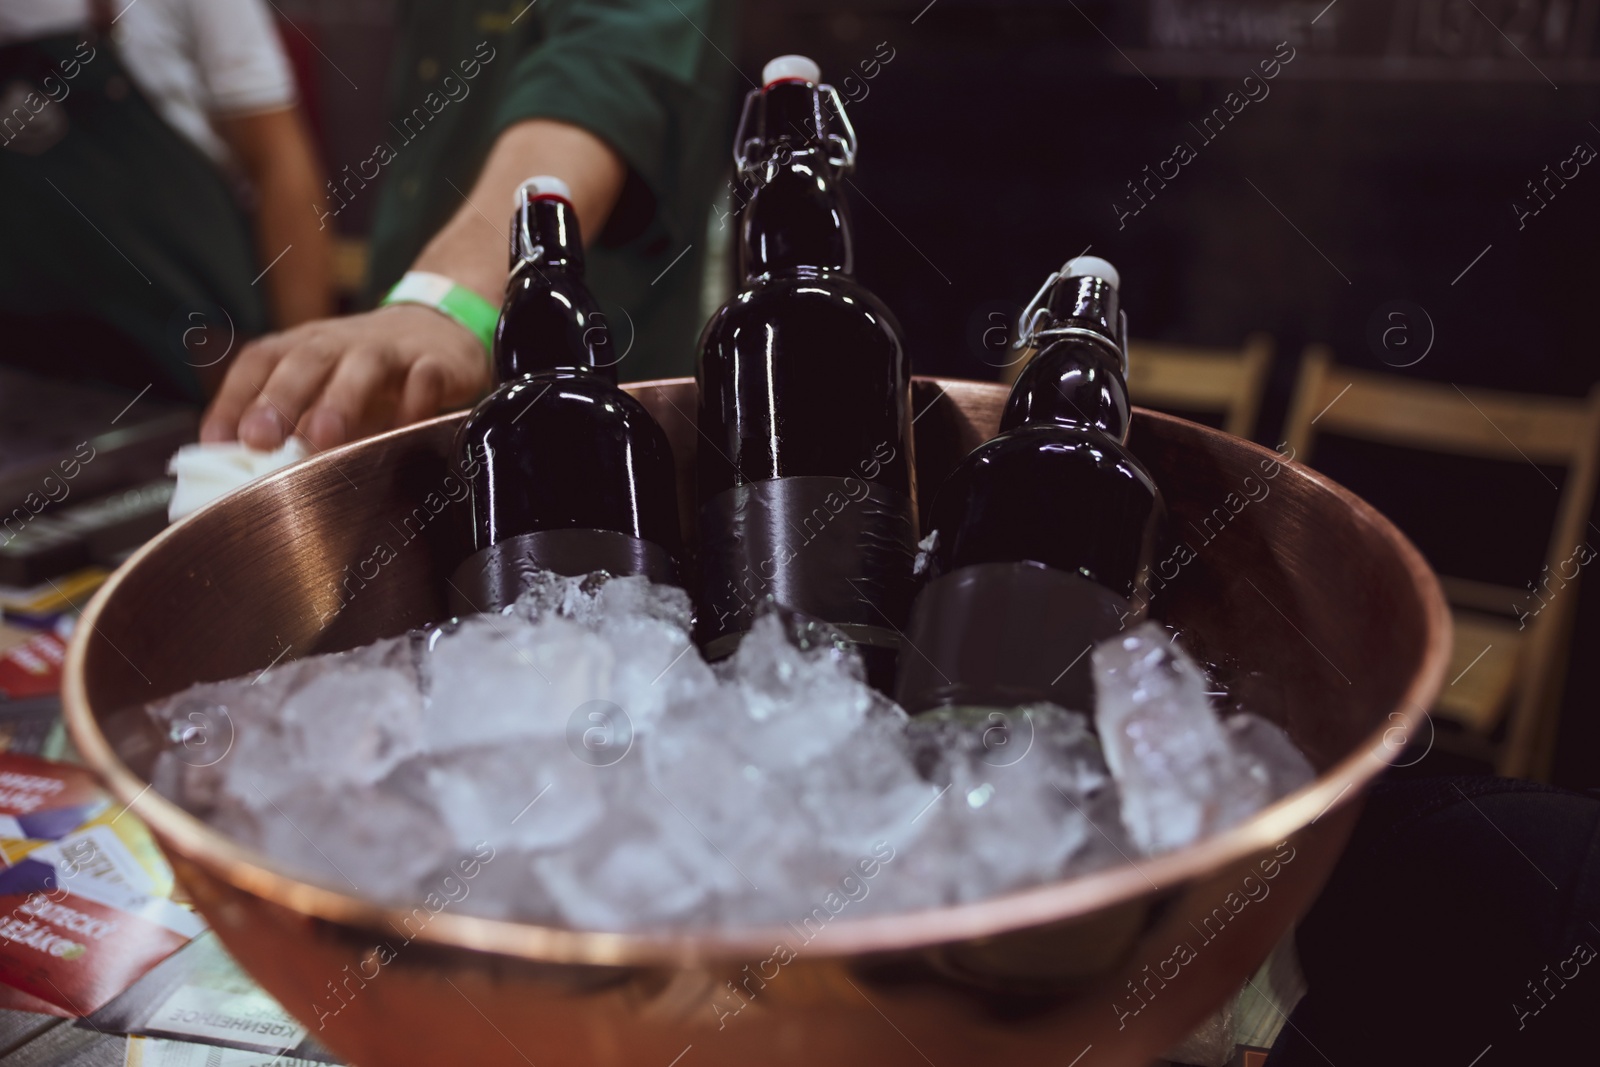 Photo of Bottles of beer served in metal bowl with ice on table